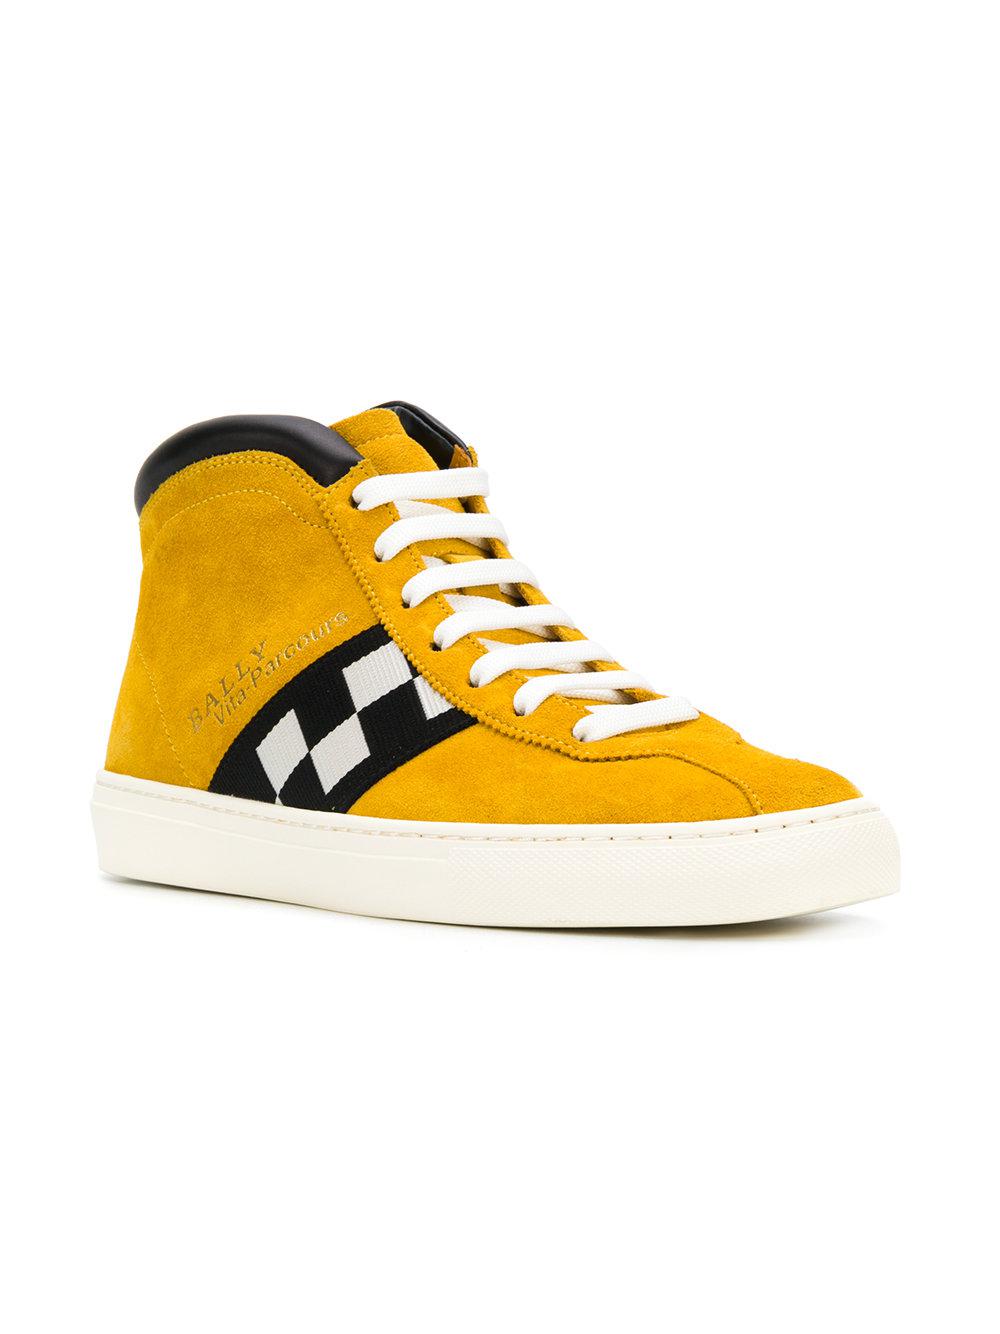 Bally Vita-parcours Sneakers in Yellow for Men | Lyst